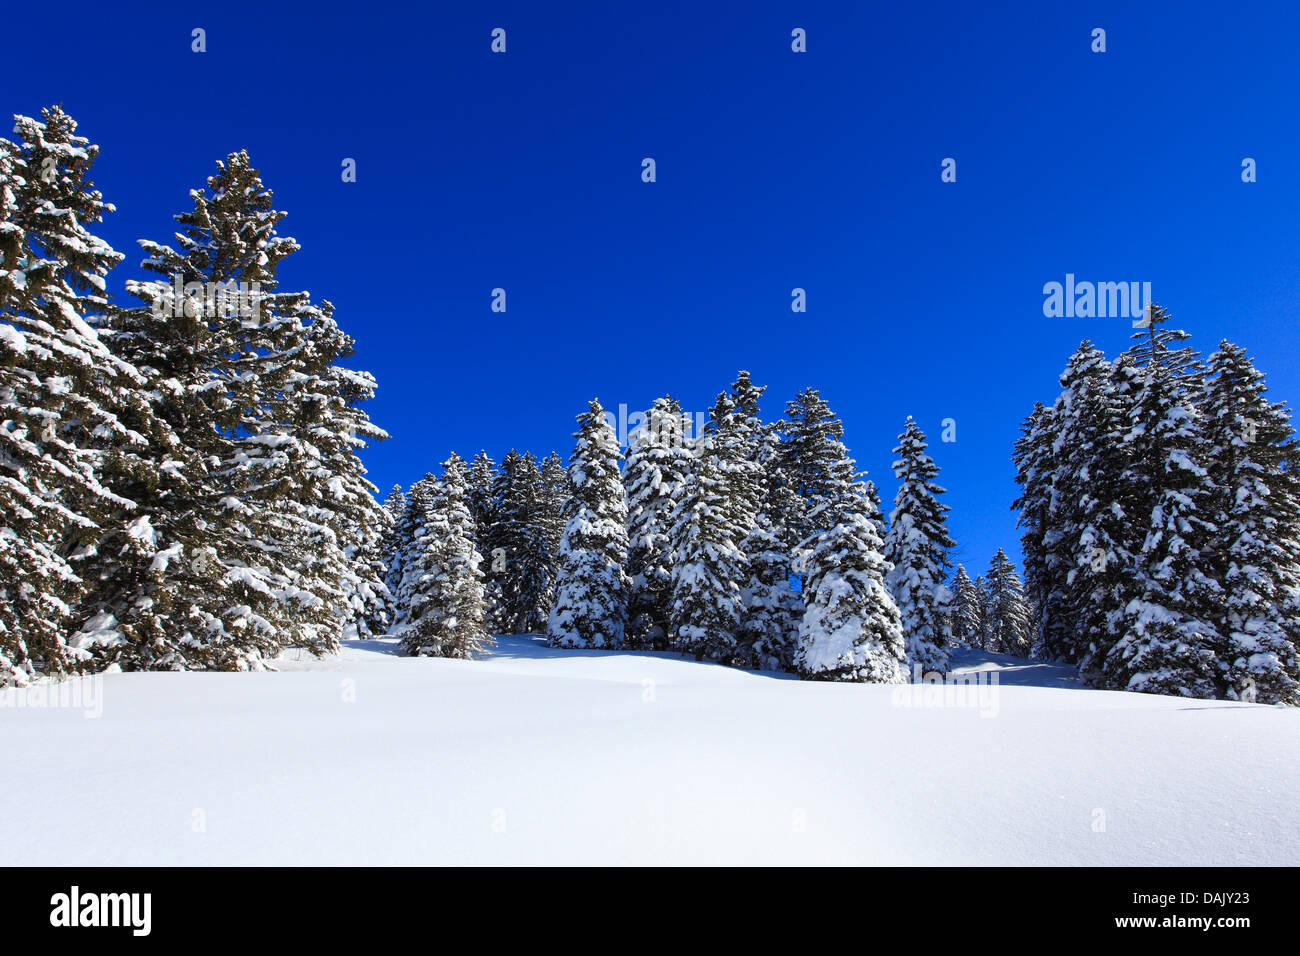 Norway spruce (Picea abies), snowy coniferous forest in sunlight, Switzerland Stock Photo